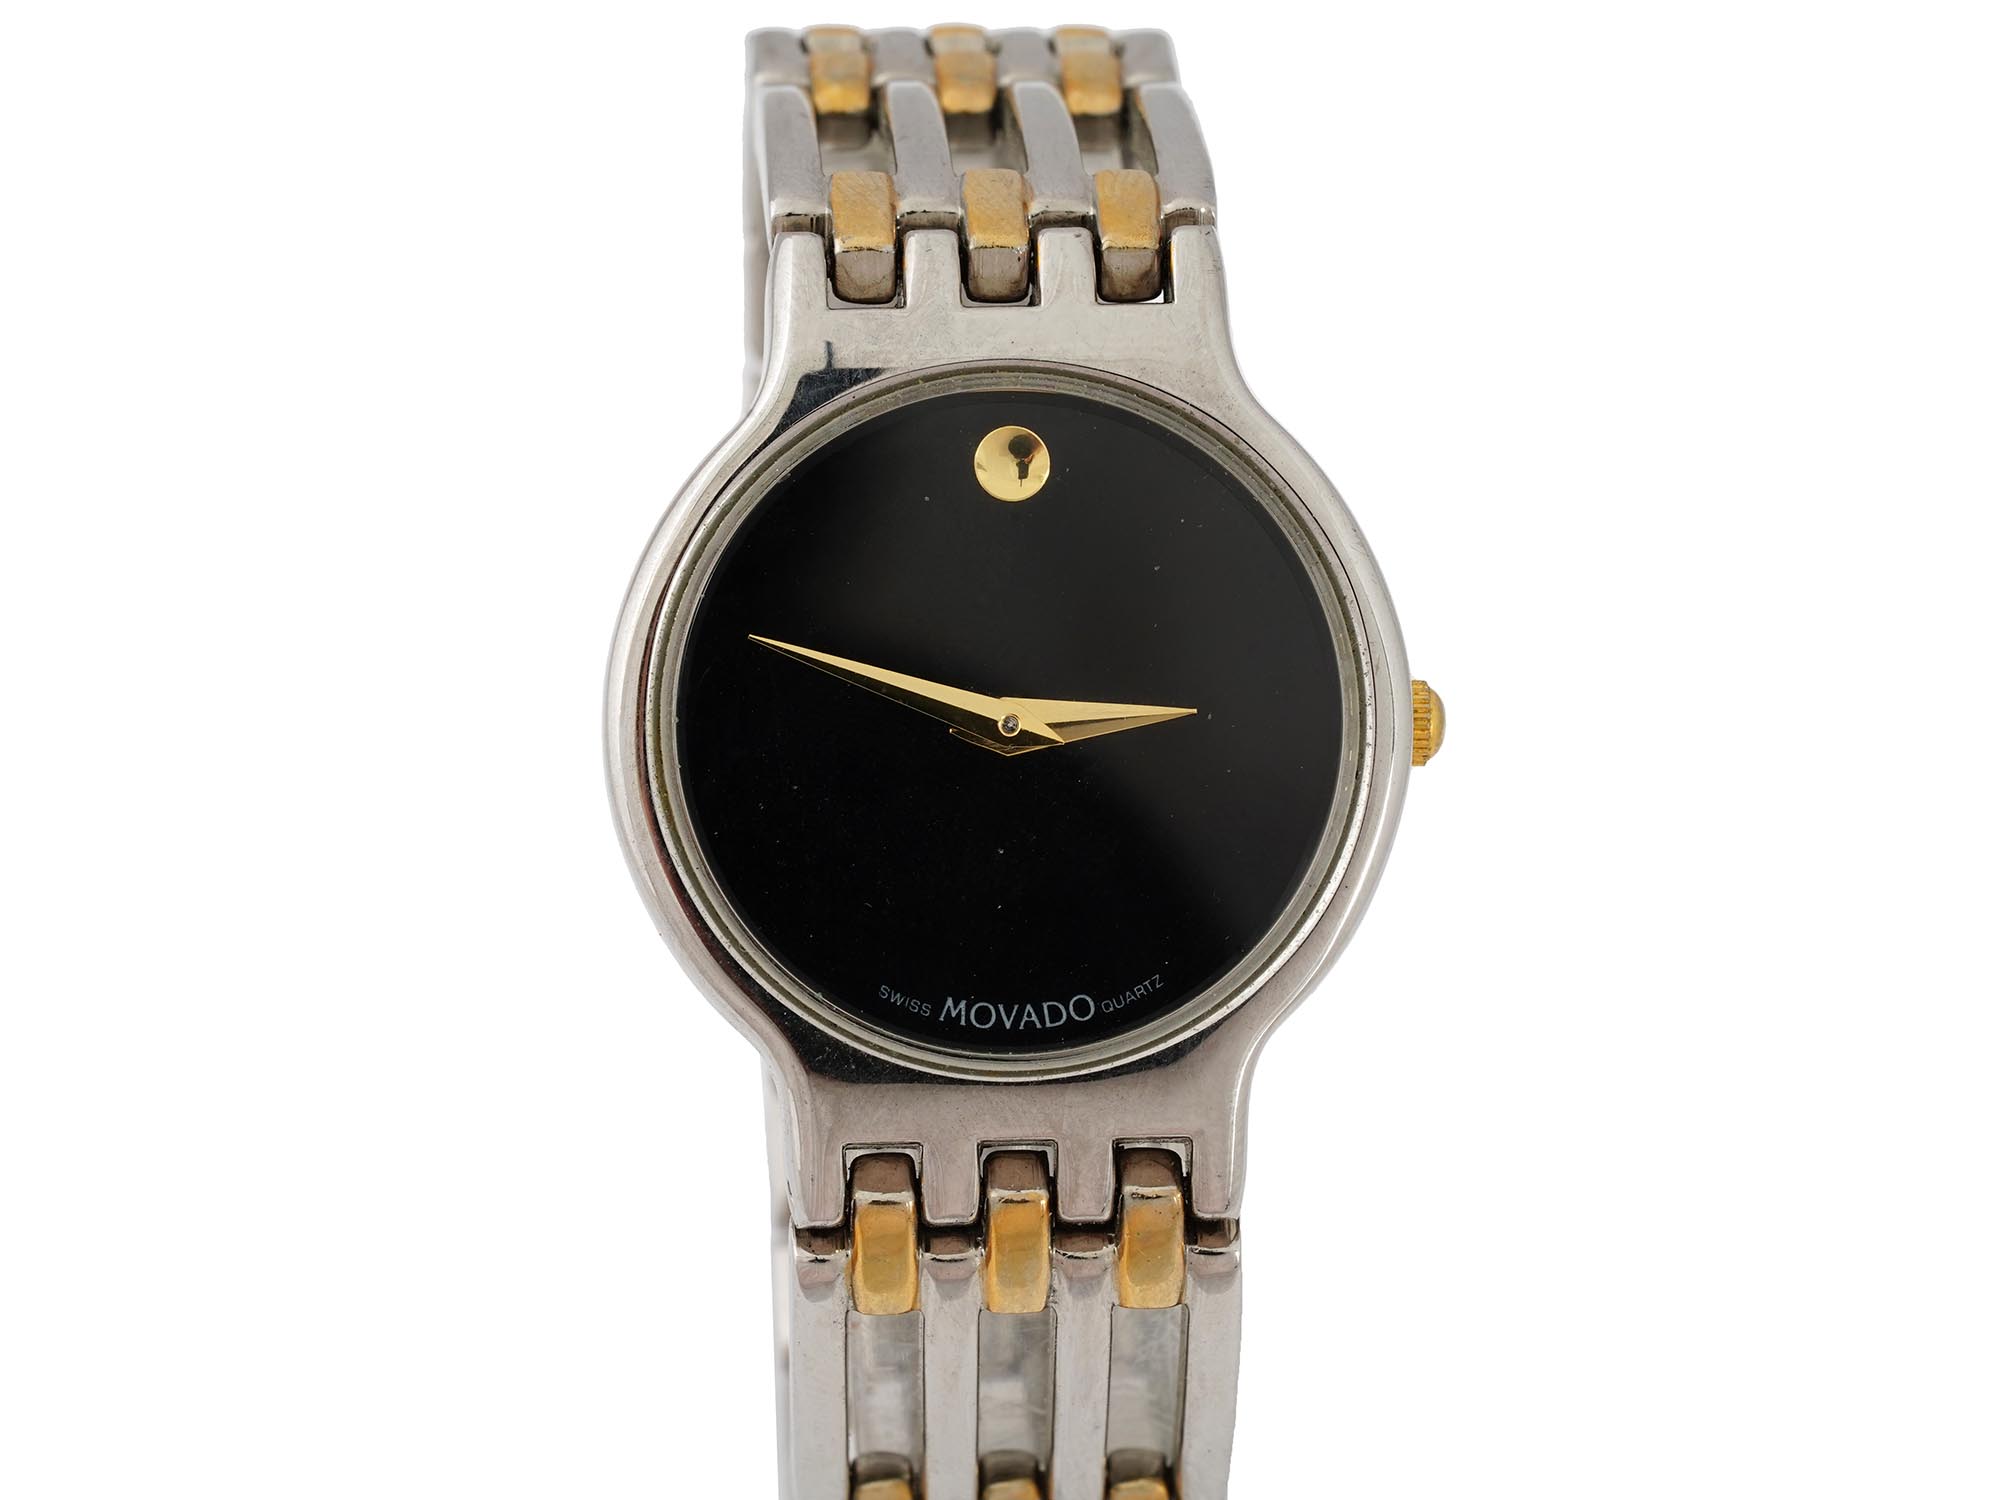 MOVADO SWISS LADIES STAINLESS STEEL WRISTWATCH PIC-4